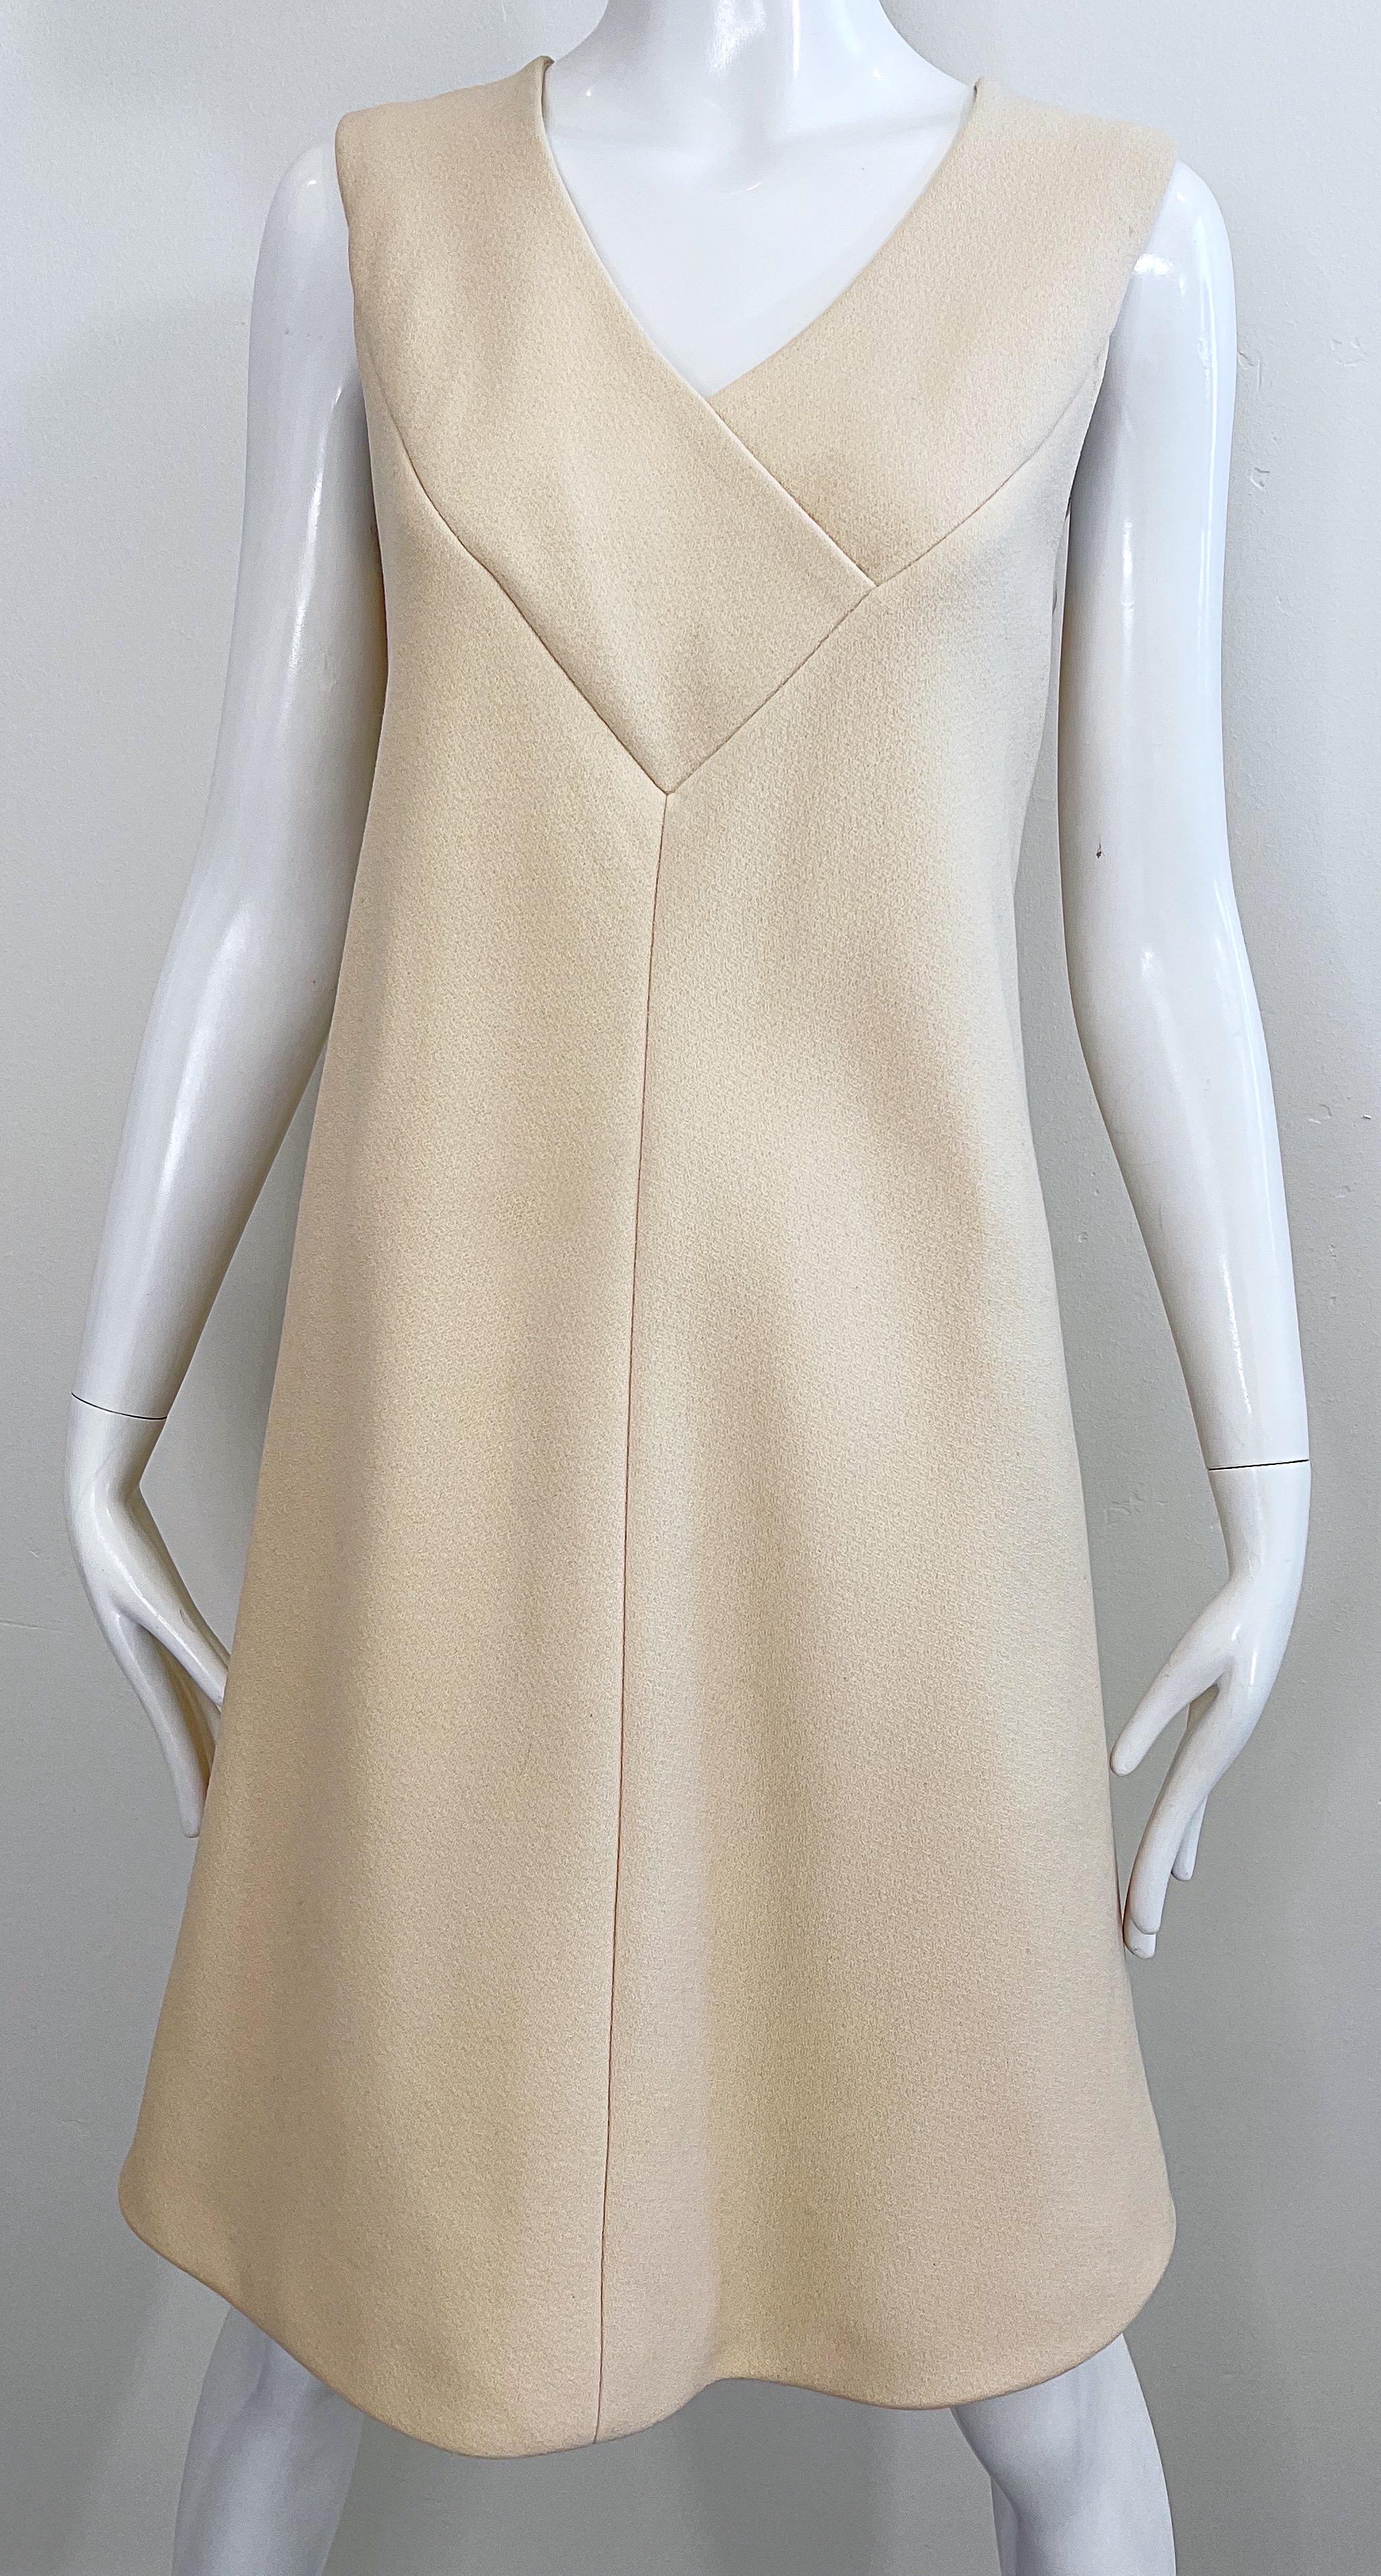 Pauline Trigere 1960s Ivory Off White Sleeveless Vintage Wool A - Line 60s Dress For Sale 1